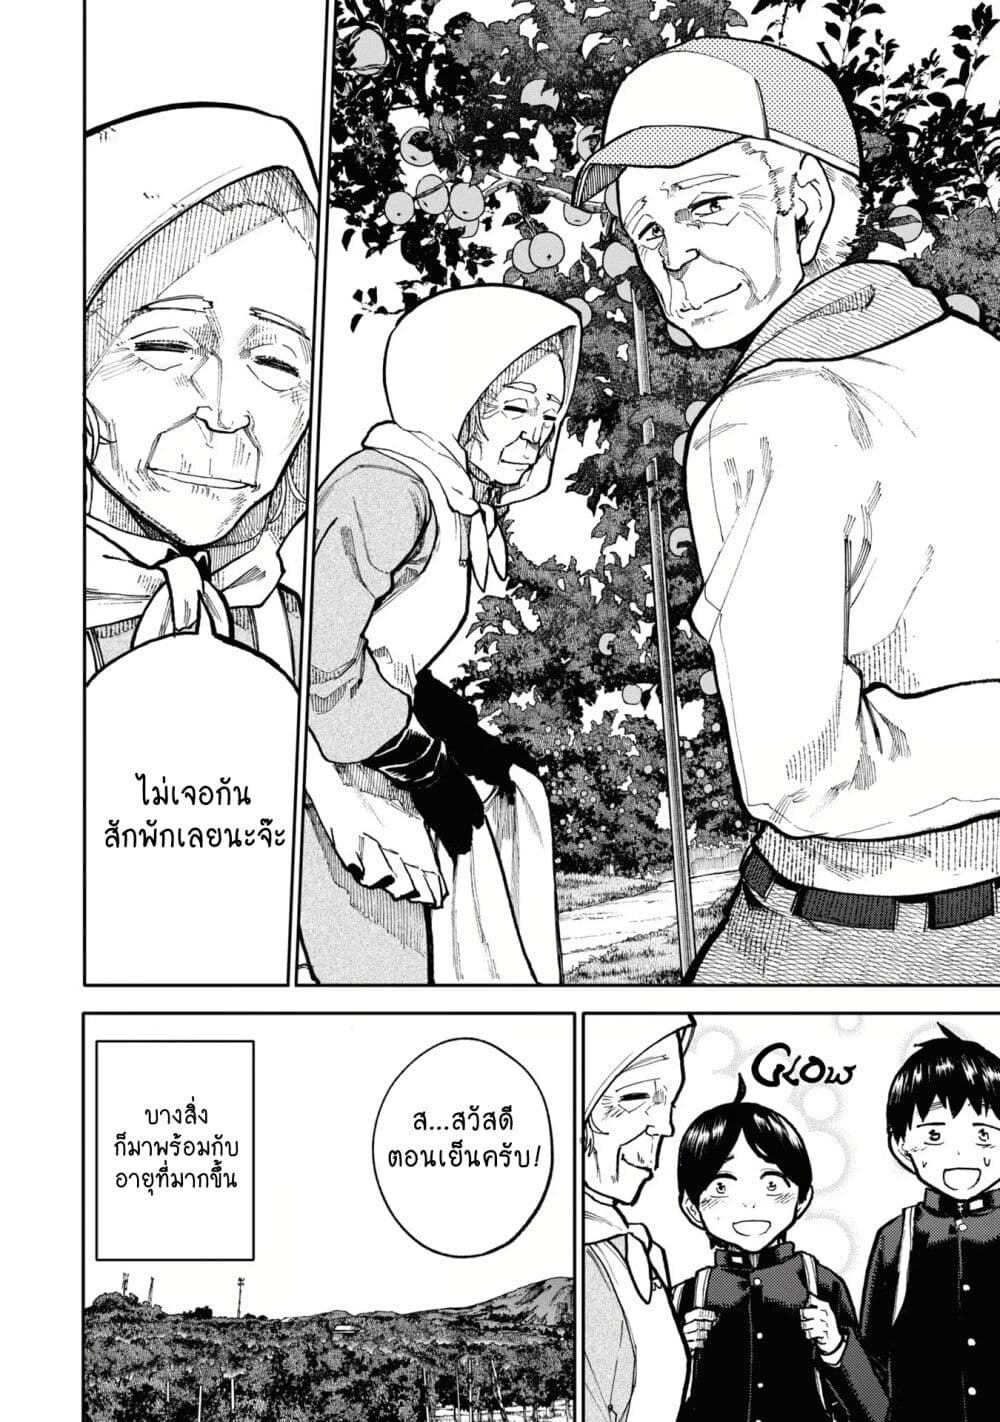 A Story About A Grampa and Granma Returned Back to their Youth คู่รักวัยดึกหวนคืนวัยหวาน 73-73